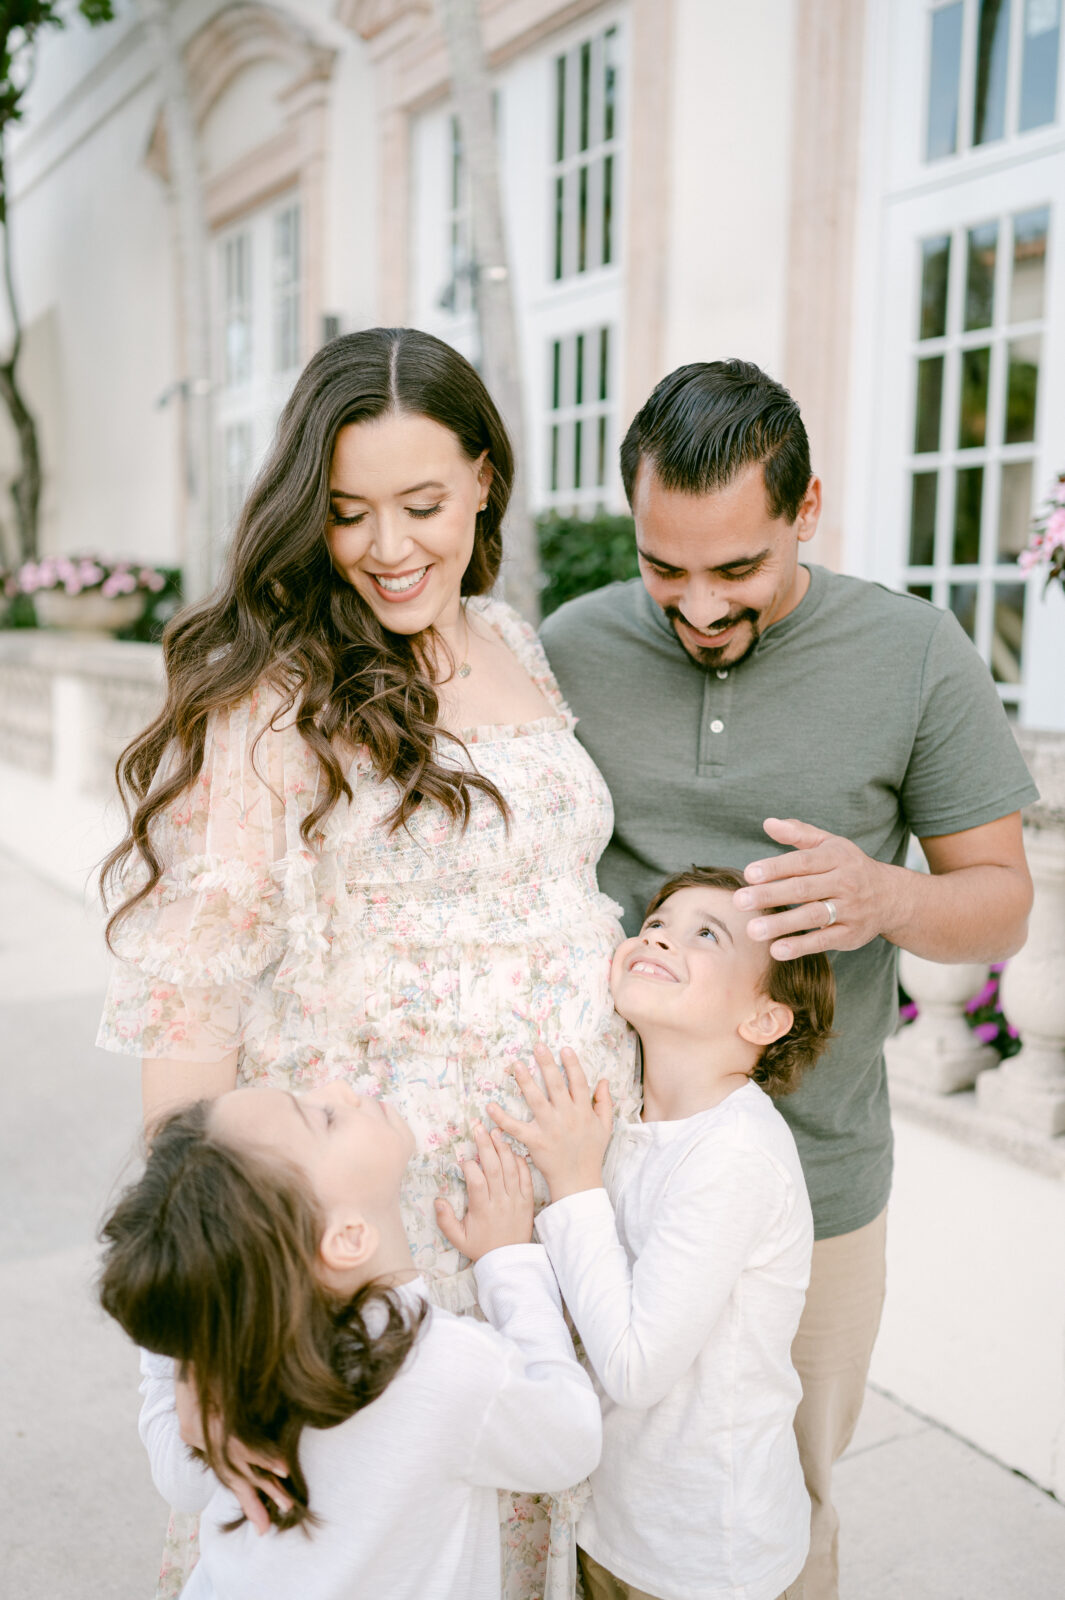 Family expecting their third child by West Palm Beach Photographer